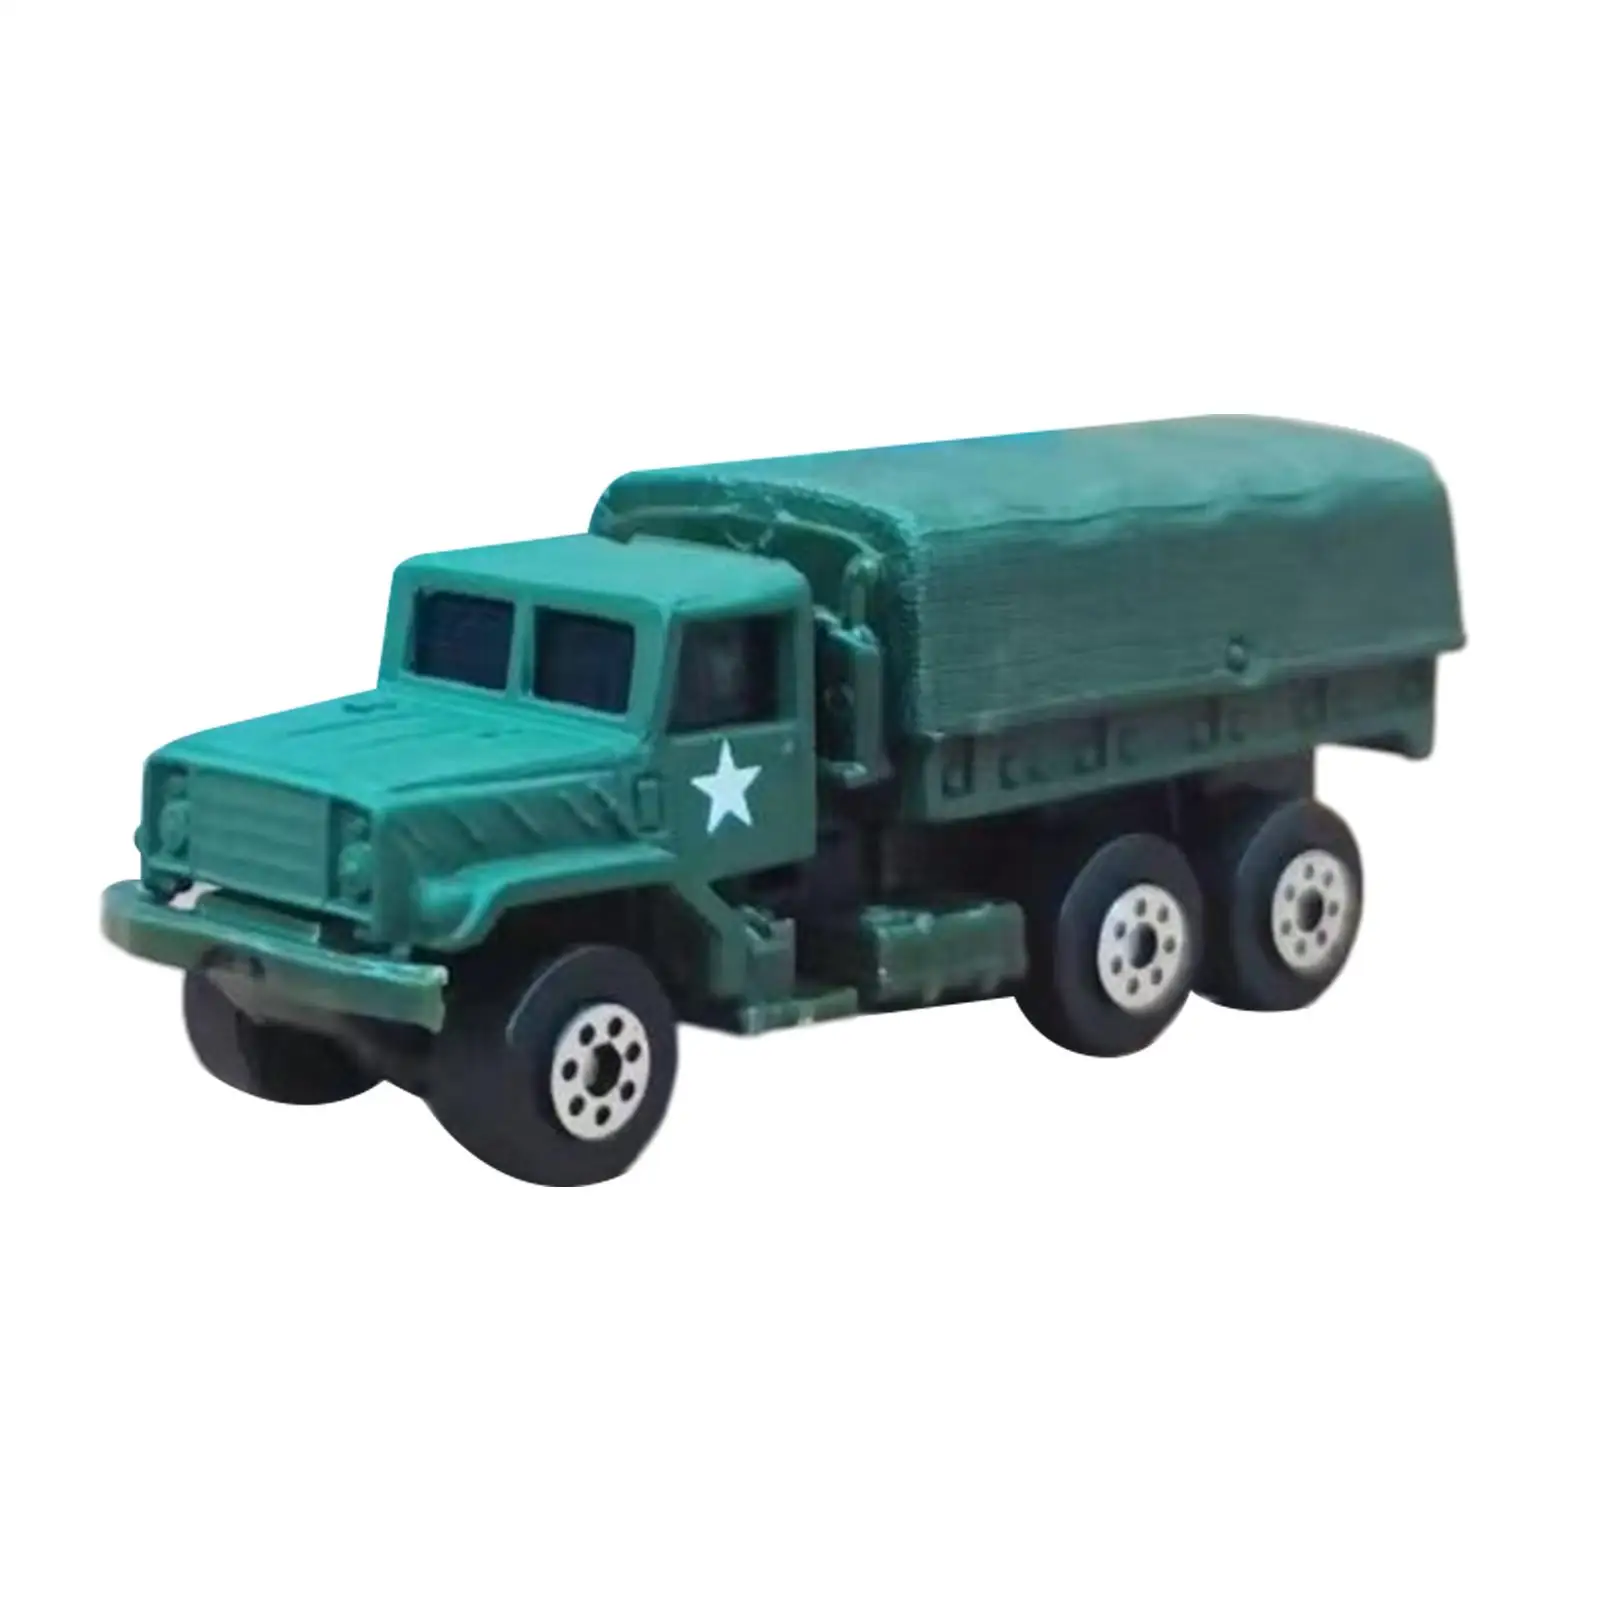 1:64 Cargo Truck Model Tabletop Decor Bedroom Cafe Decoration Collectables for Friends Teens Boys Kids Birthday Gifts